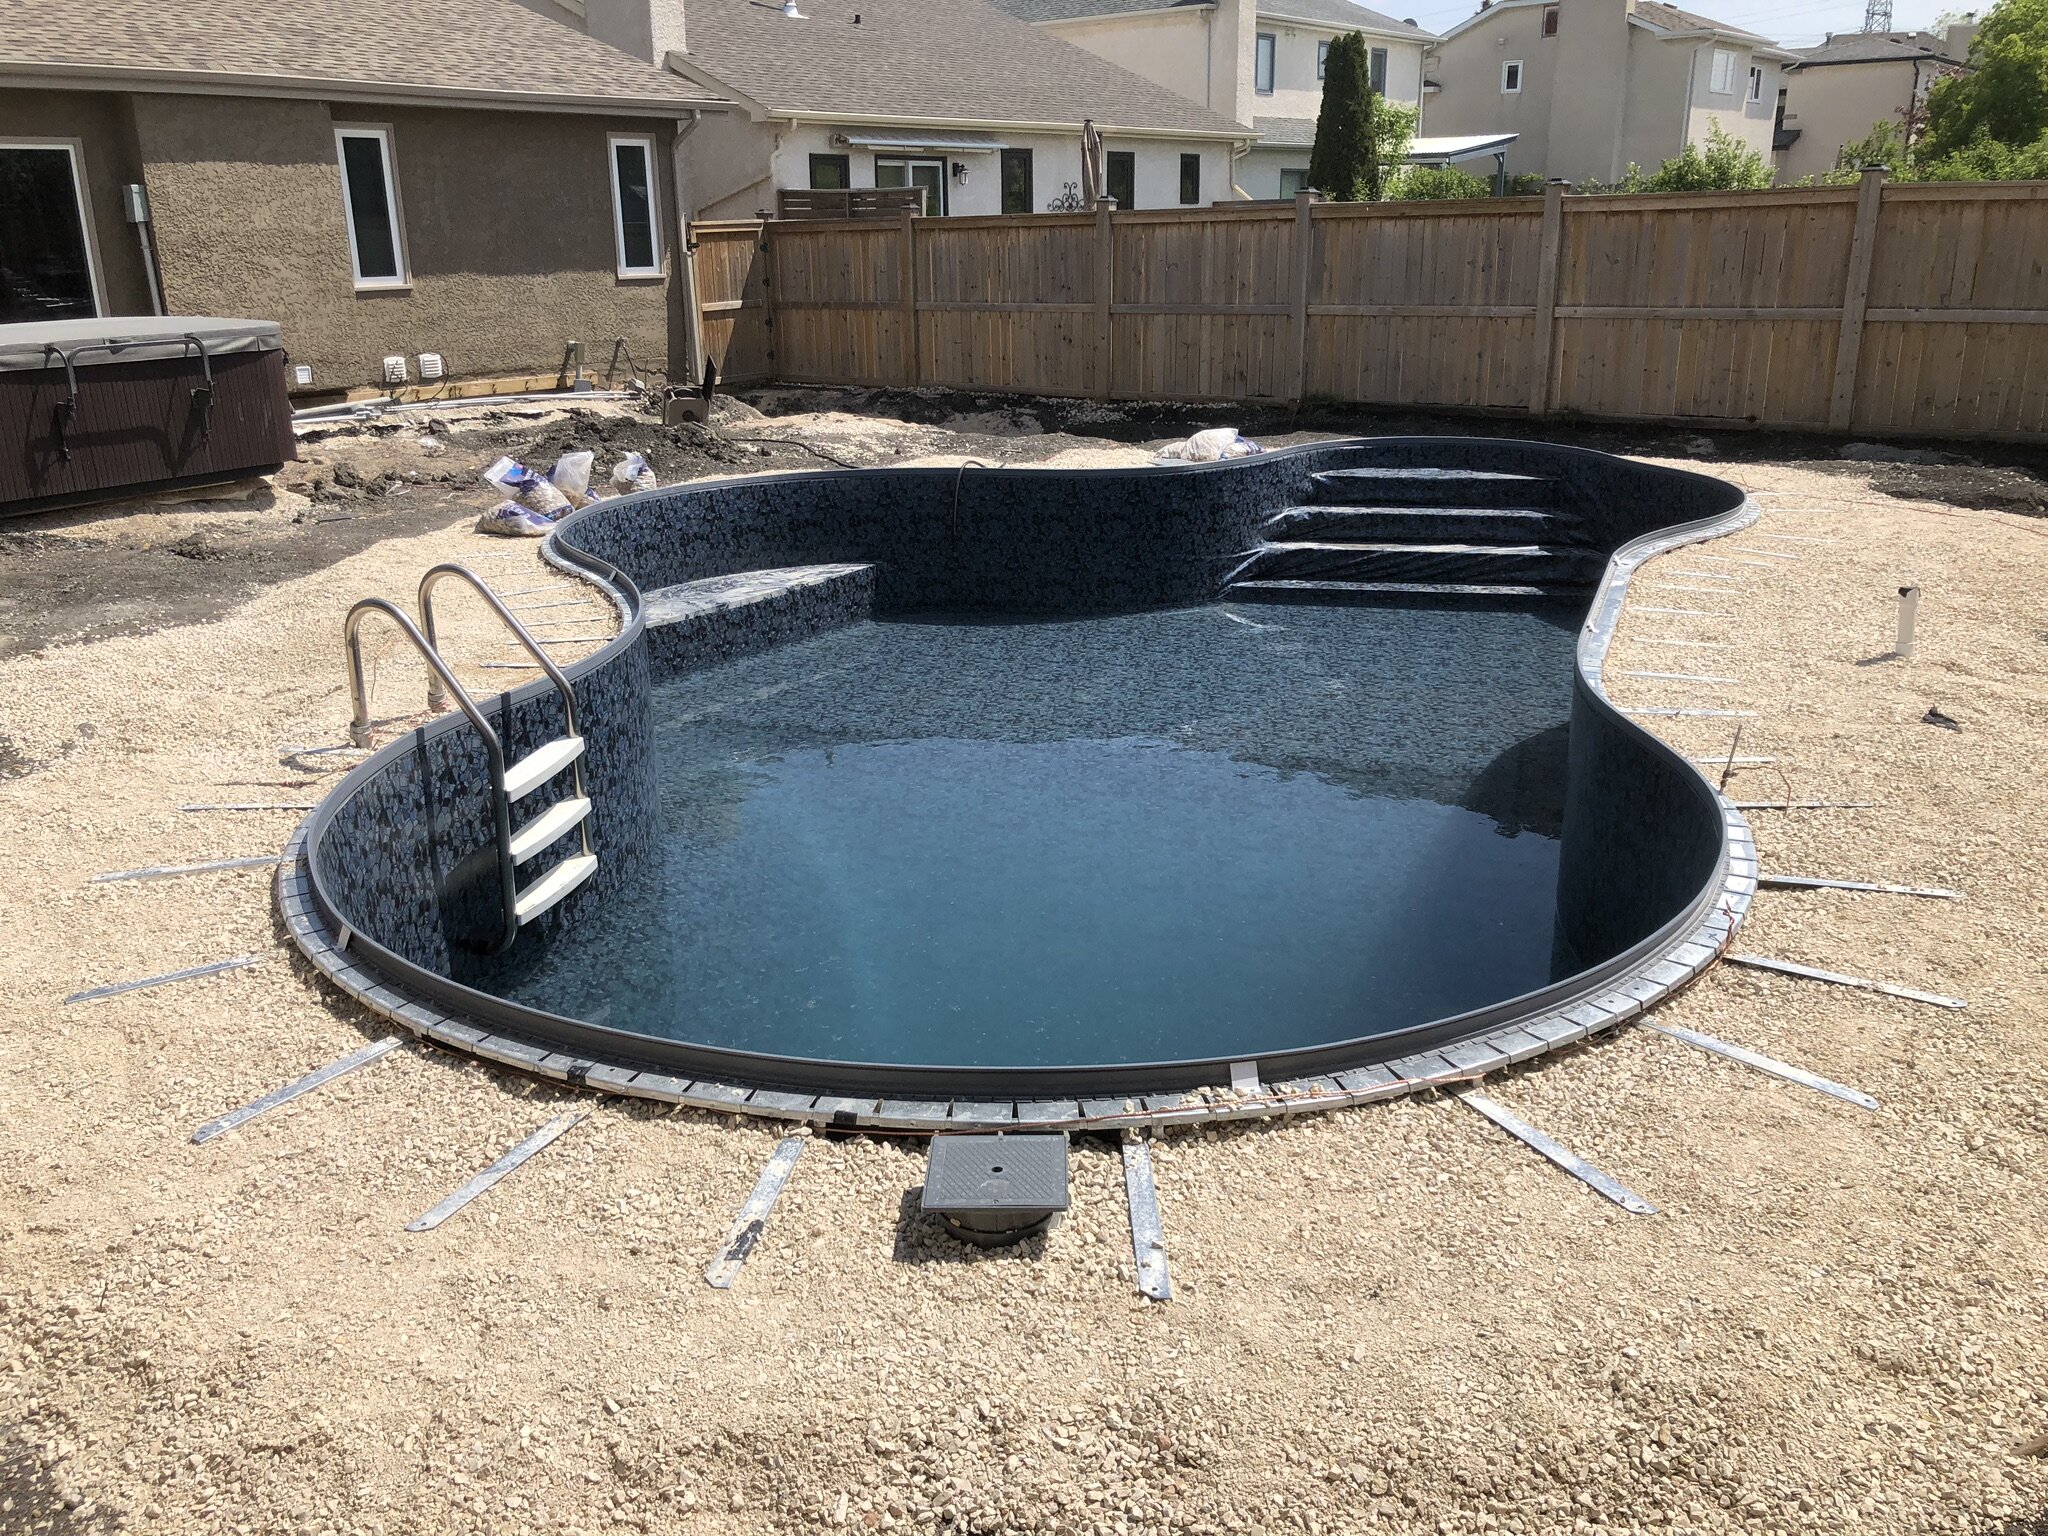 What Materials Are Used in The Construction of a Black Bottom Pool